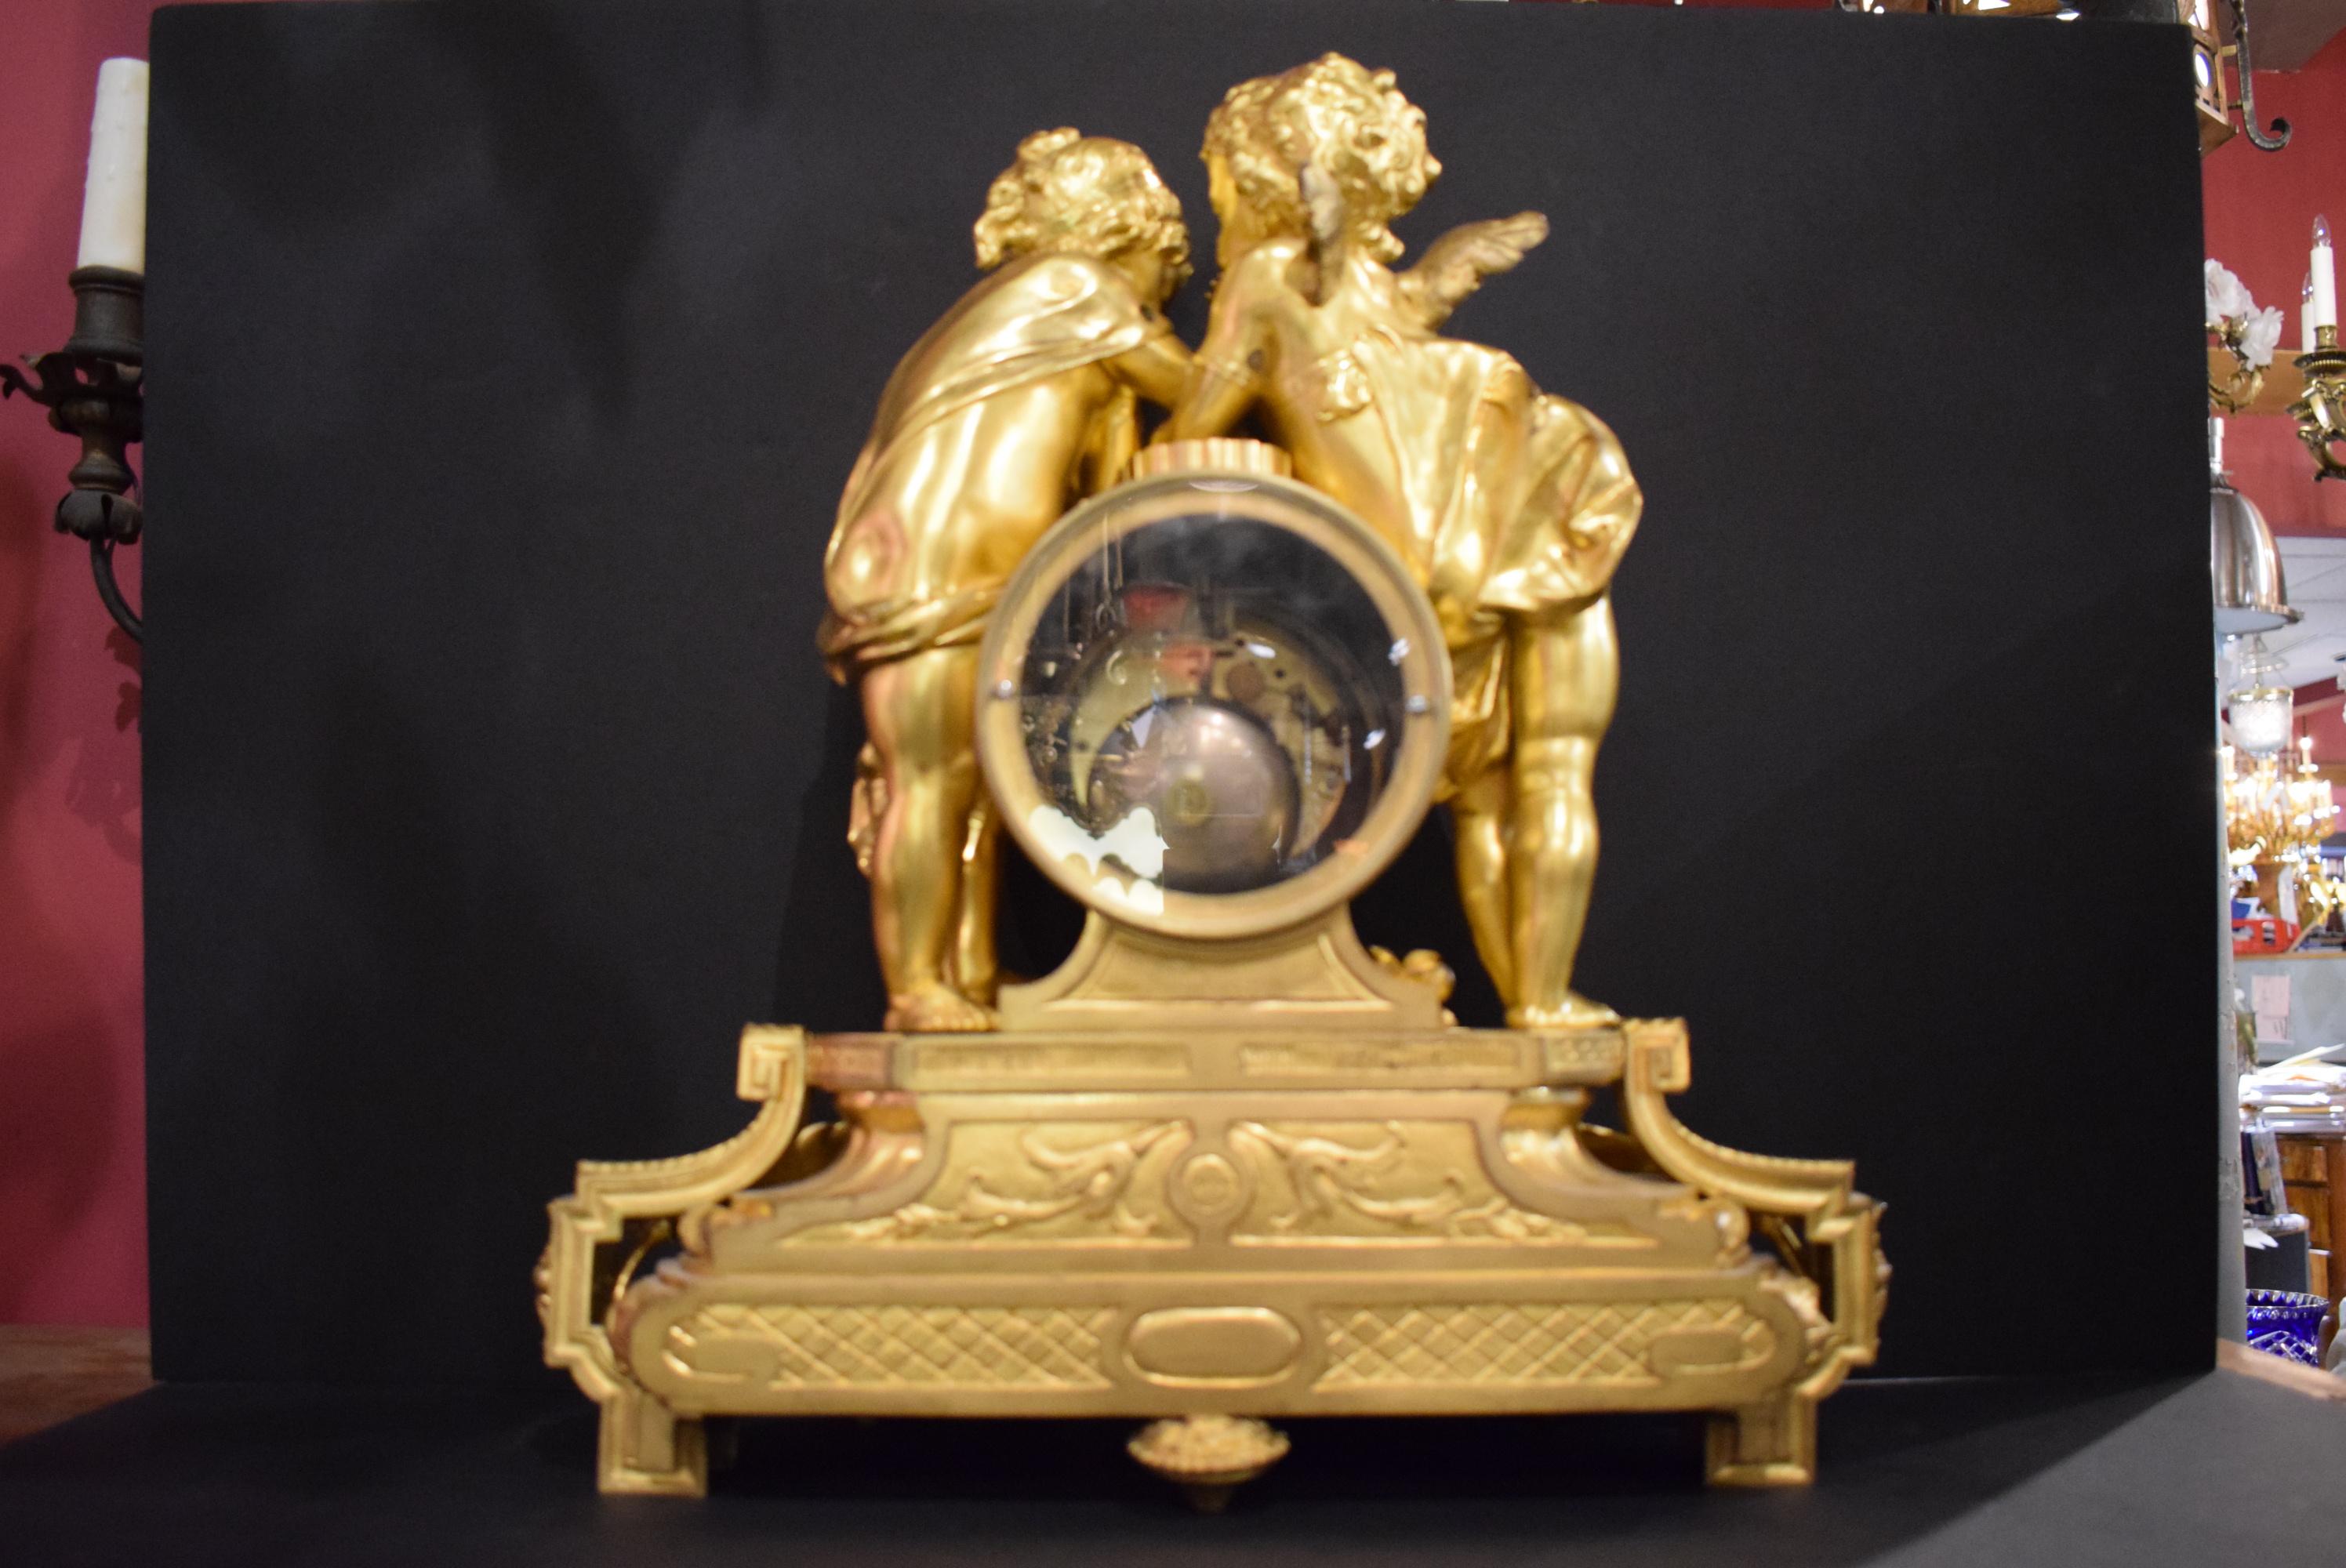 A very fine gilt bronze clock depicting infant, cupid and psyche. An exquisite Louis XVI base. Signed Prosper Roussel.
Paris, France, circa 1900
Dimensions: Height 17 1/2